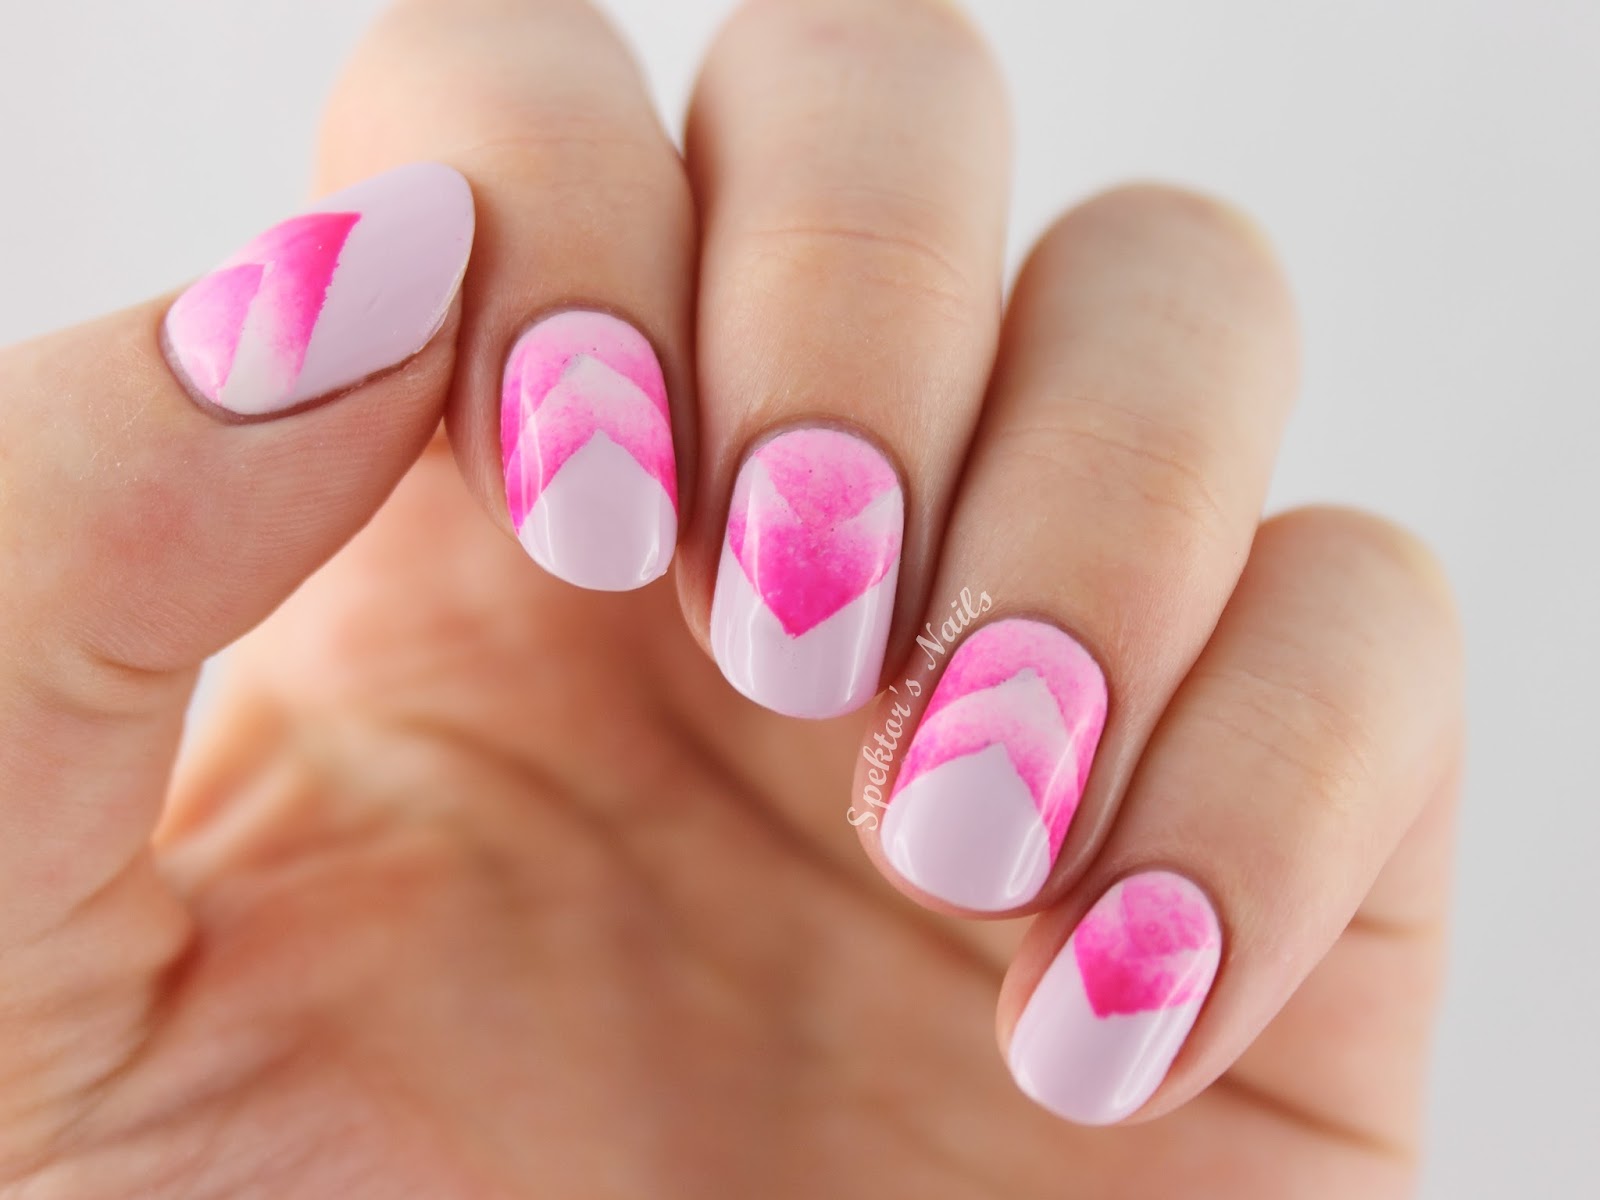 1. Gradient Nail Art Designs for a Chic and Easy Manicure - wide 3